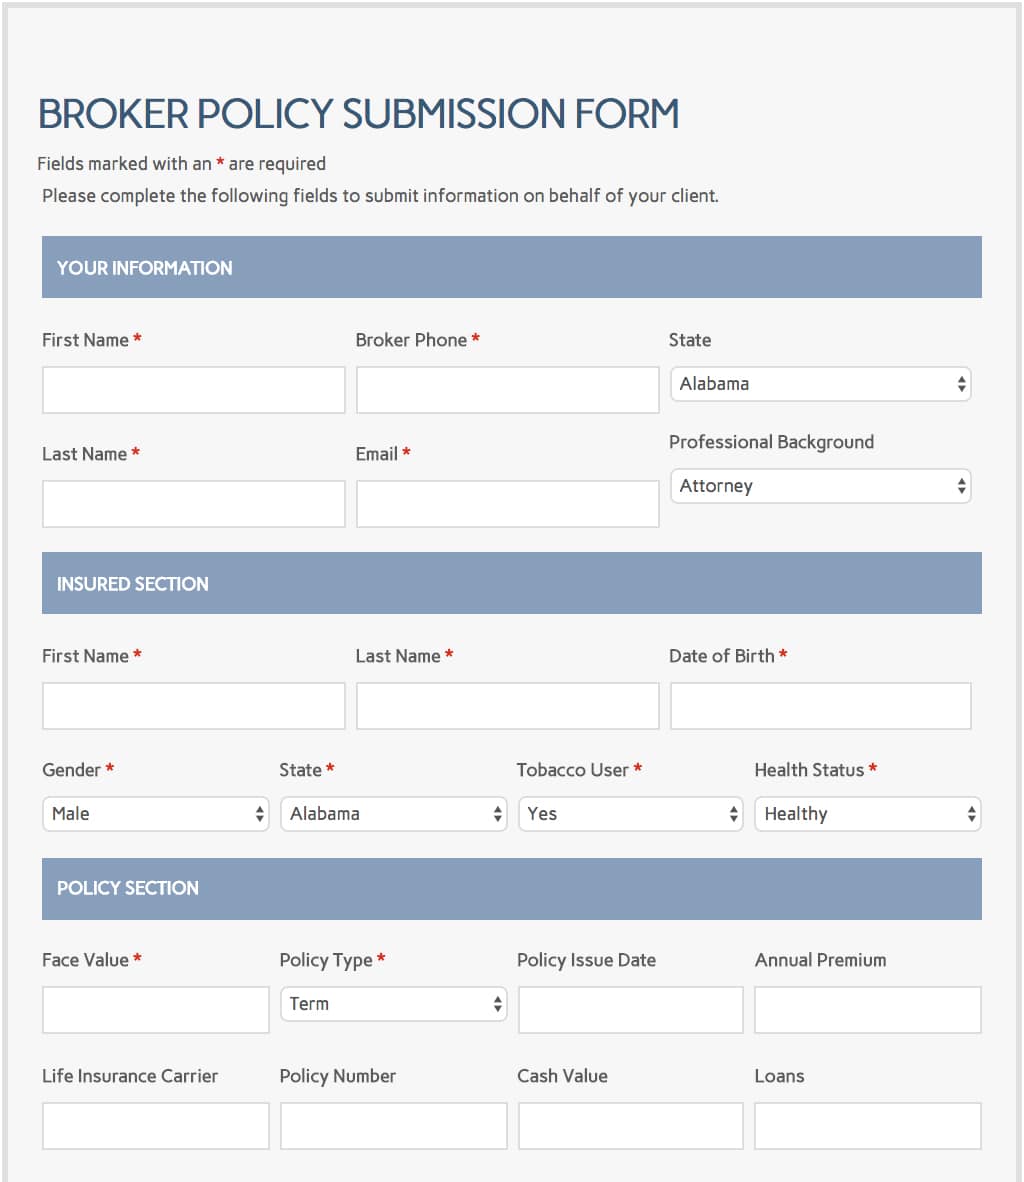 Broker Policy Submission Form